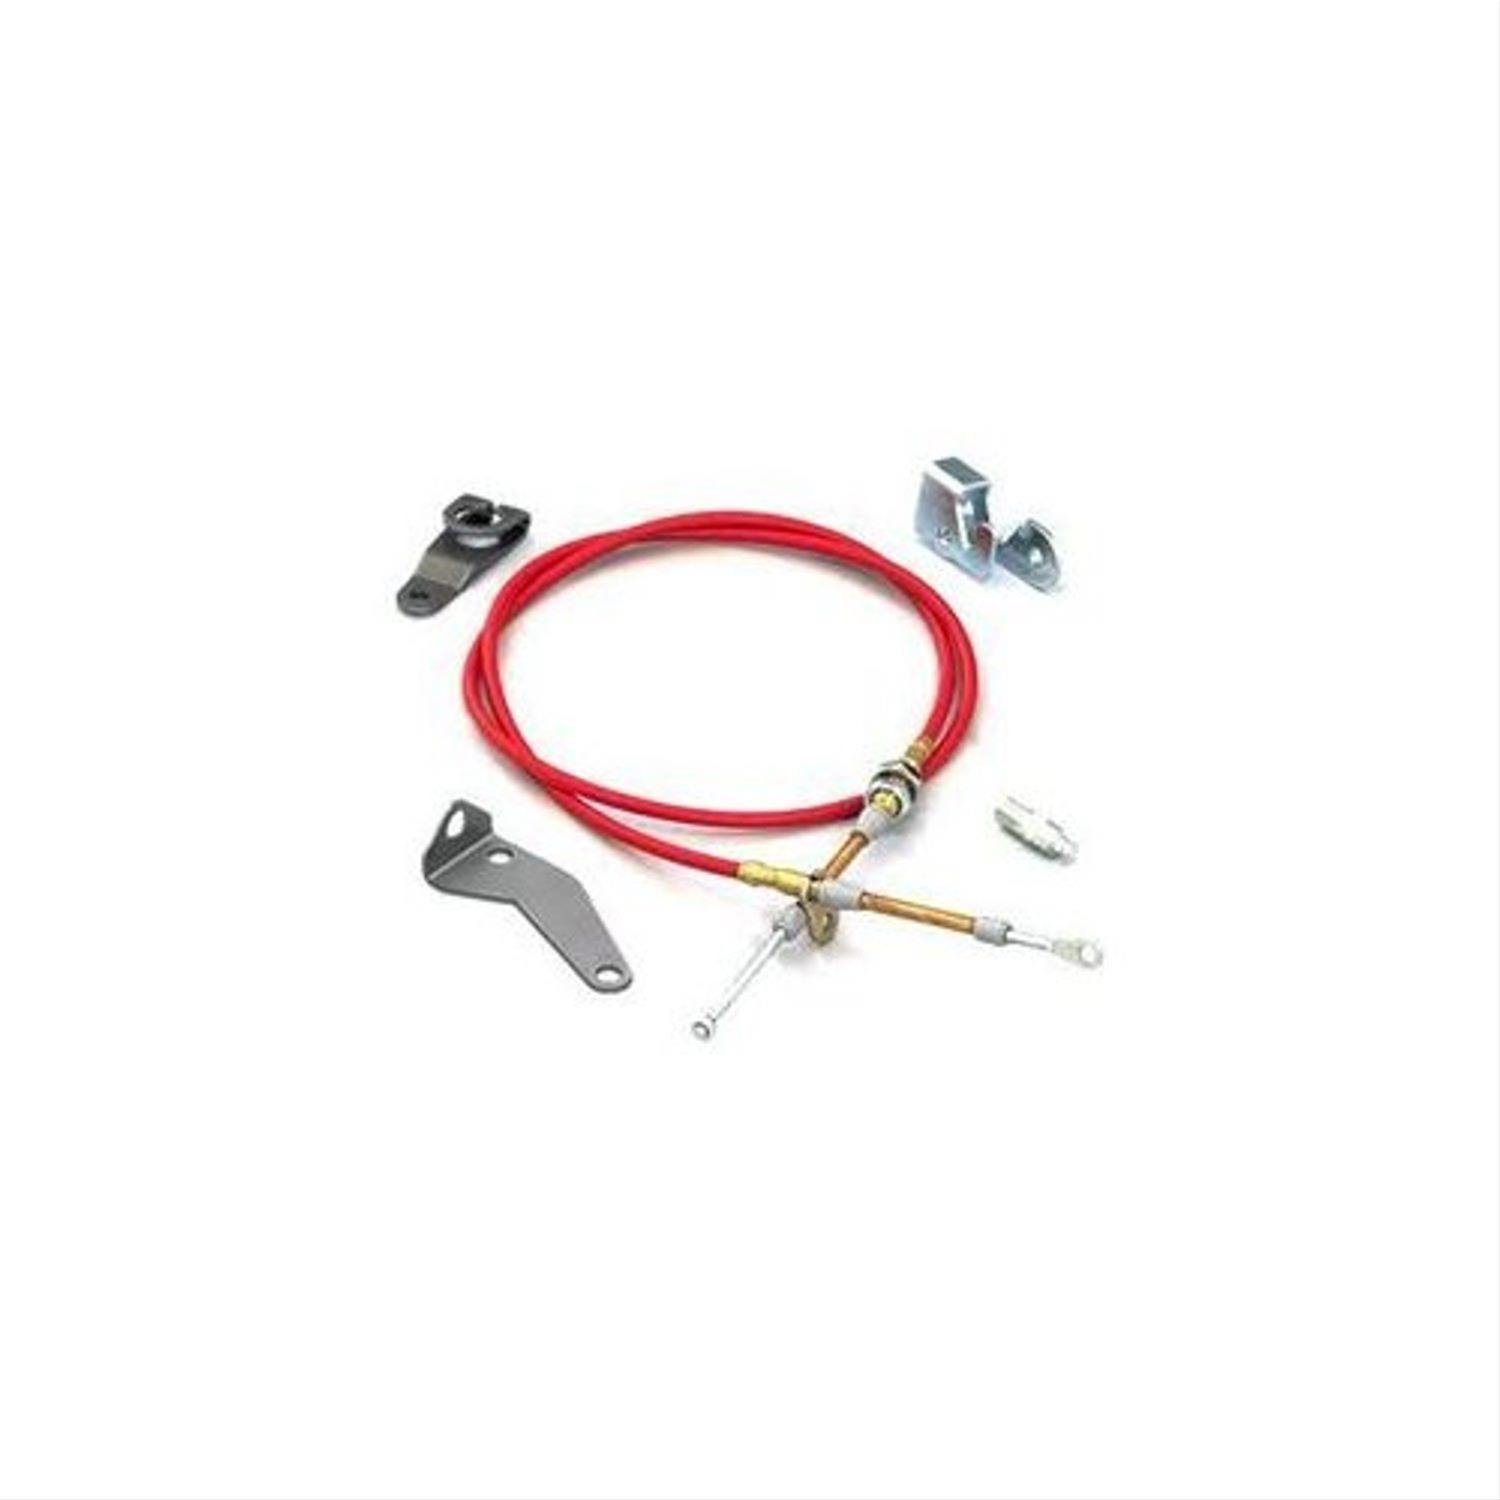 Hammer Shifter Installation Kit For Use With 130-81001 and 130-81002 Mustang with C4 Transmission